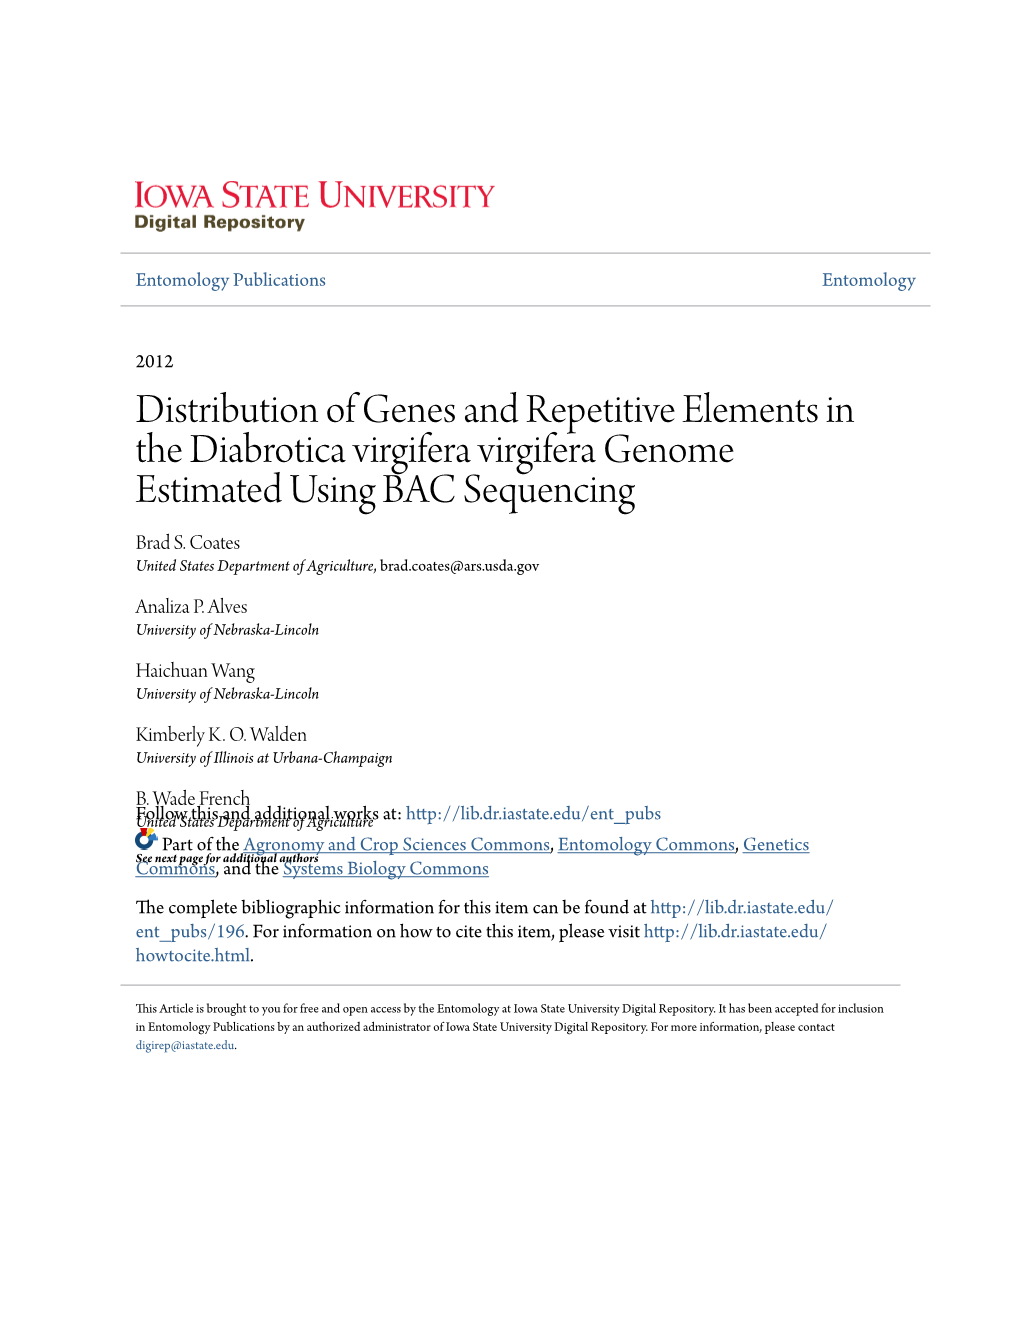 Distribution of Genes and Repetitive Elements in the Diabrotica Virgifera Virgifera Genome Estimated Using BAC Sequencing Brad S